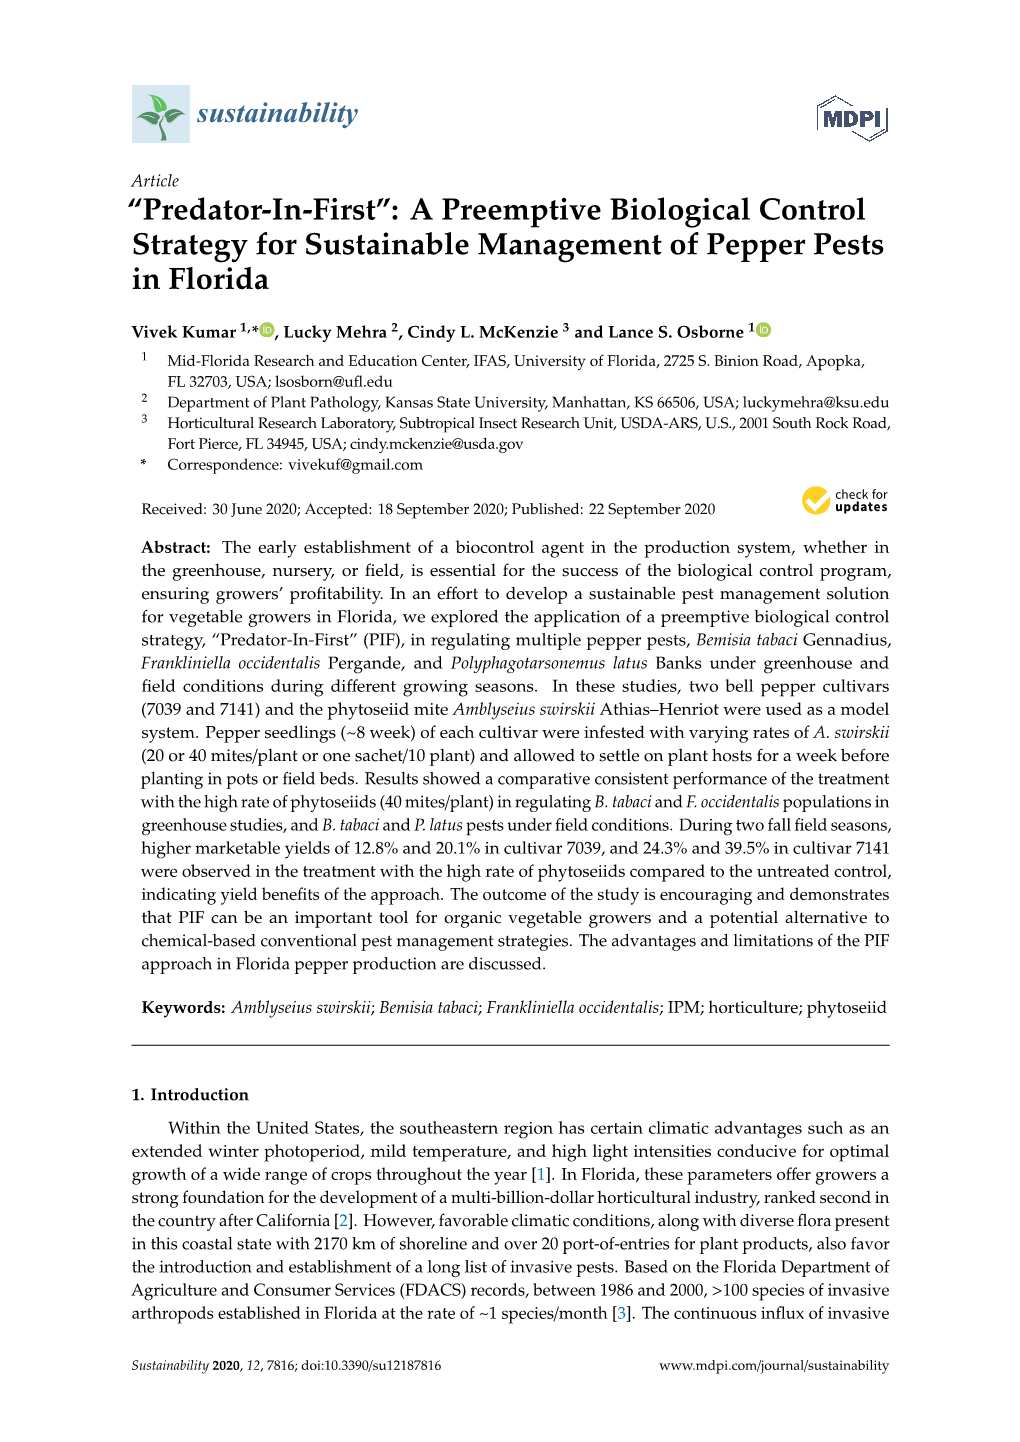 Predator-In-First”: a Preemptive Biological Control Strategy for Sustainable Management of Pepper Pests in Florida